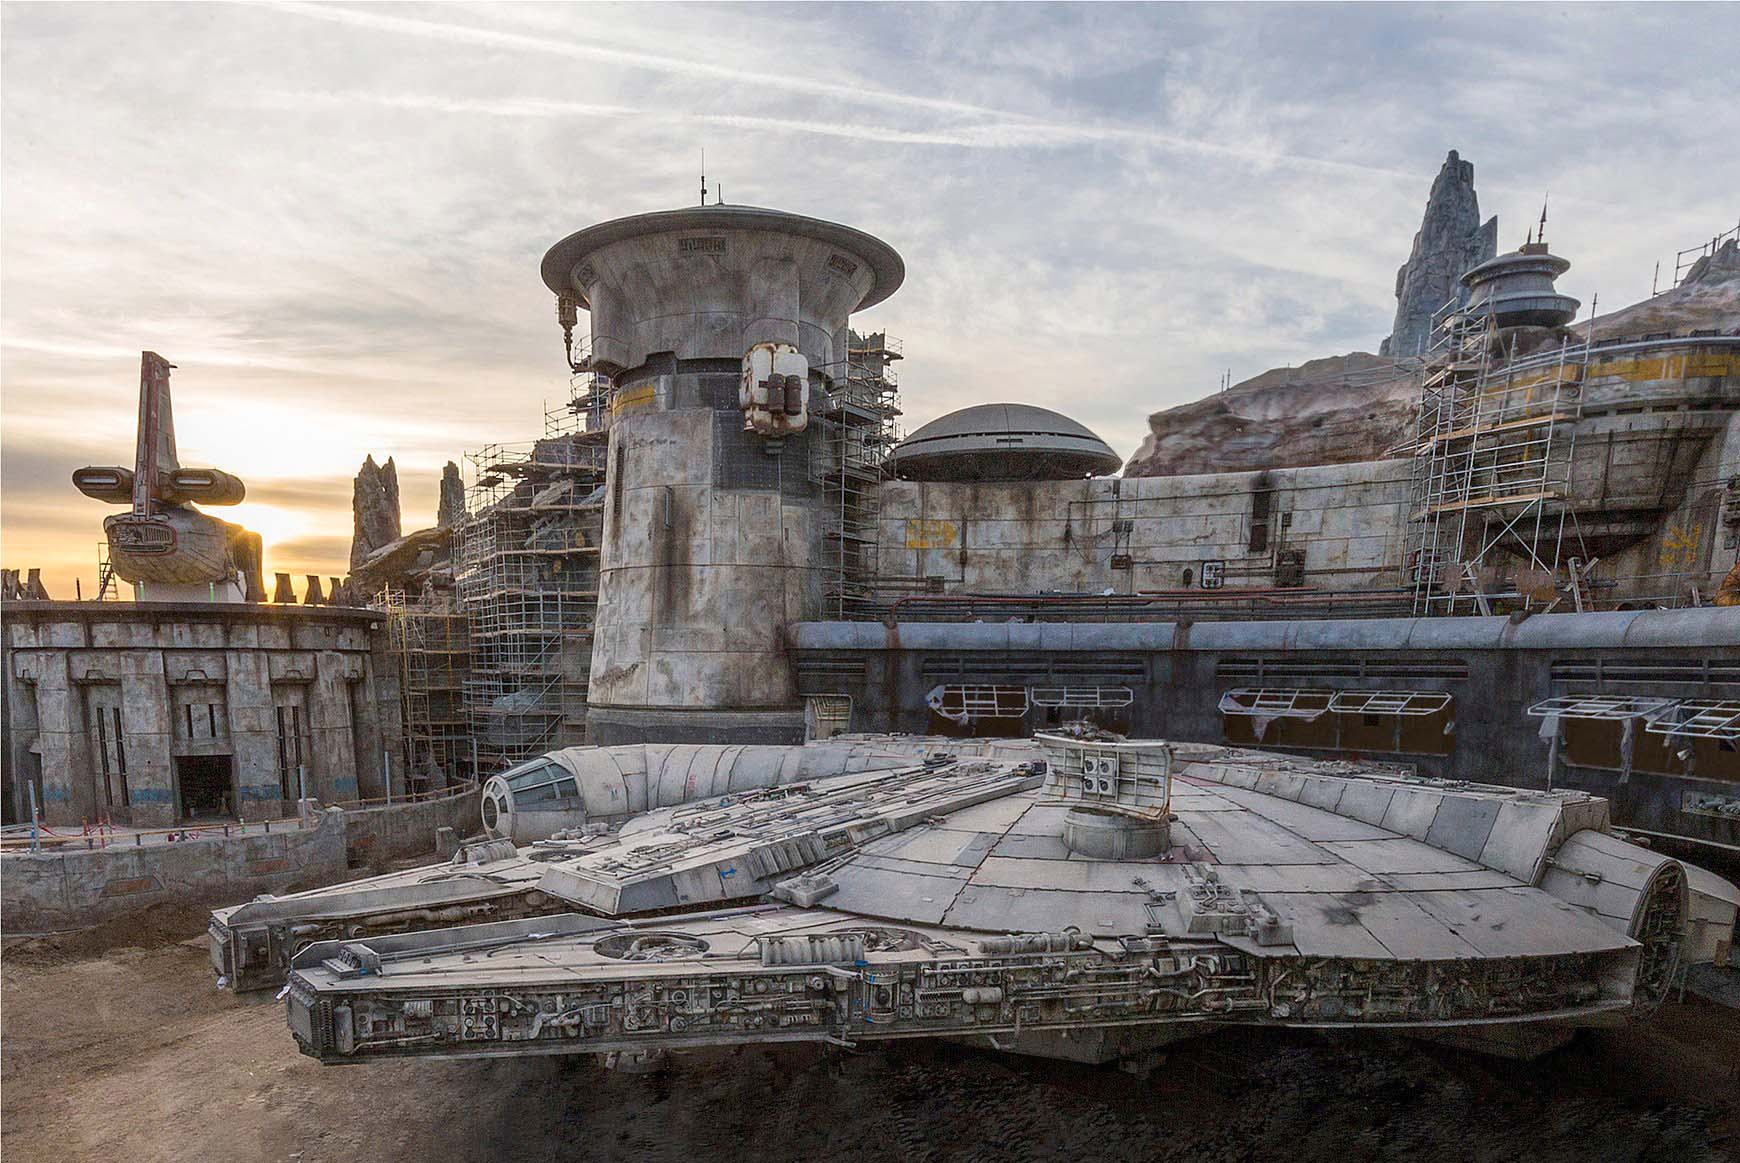 PHOTO: The completed Millennium Falcon sits amid Star Wars: Galaxy's Edge buildings still under construction at Disneyland in this image released in December 2018.